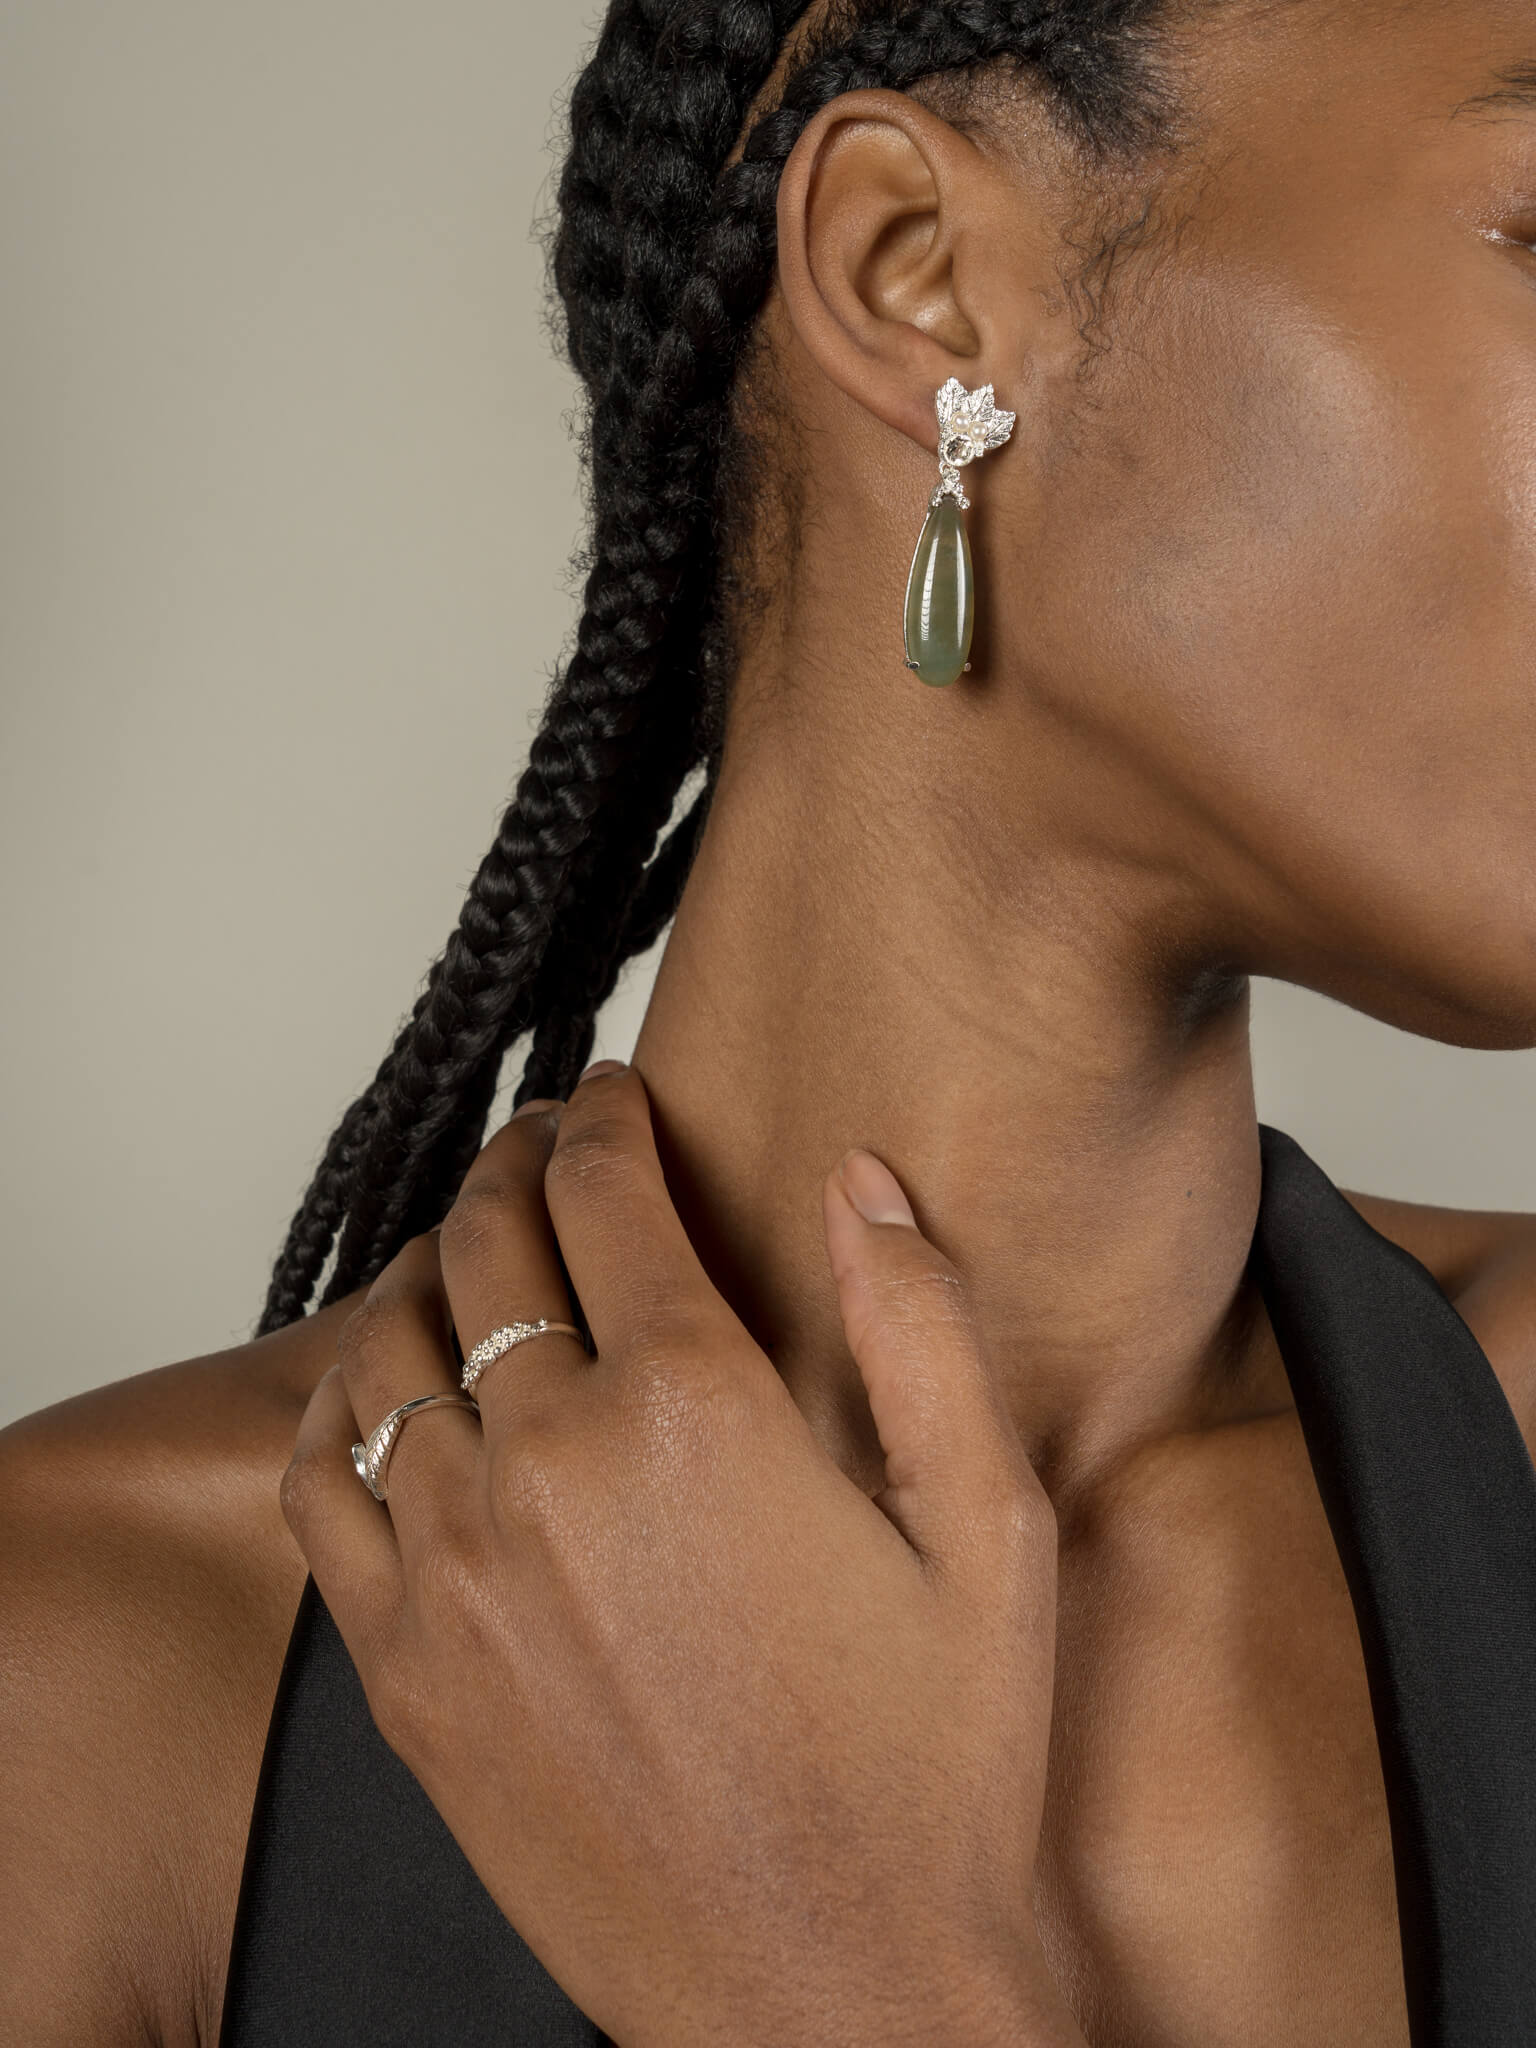 A woman wearing The Muse III Agata Moss earrings by Cremilde Bispo Jewellery and a black top.